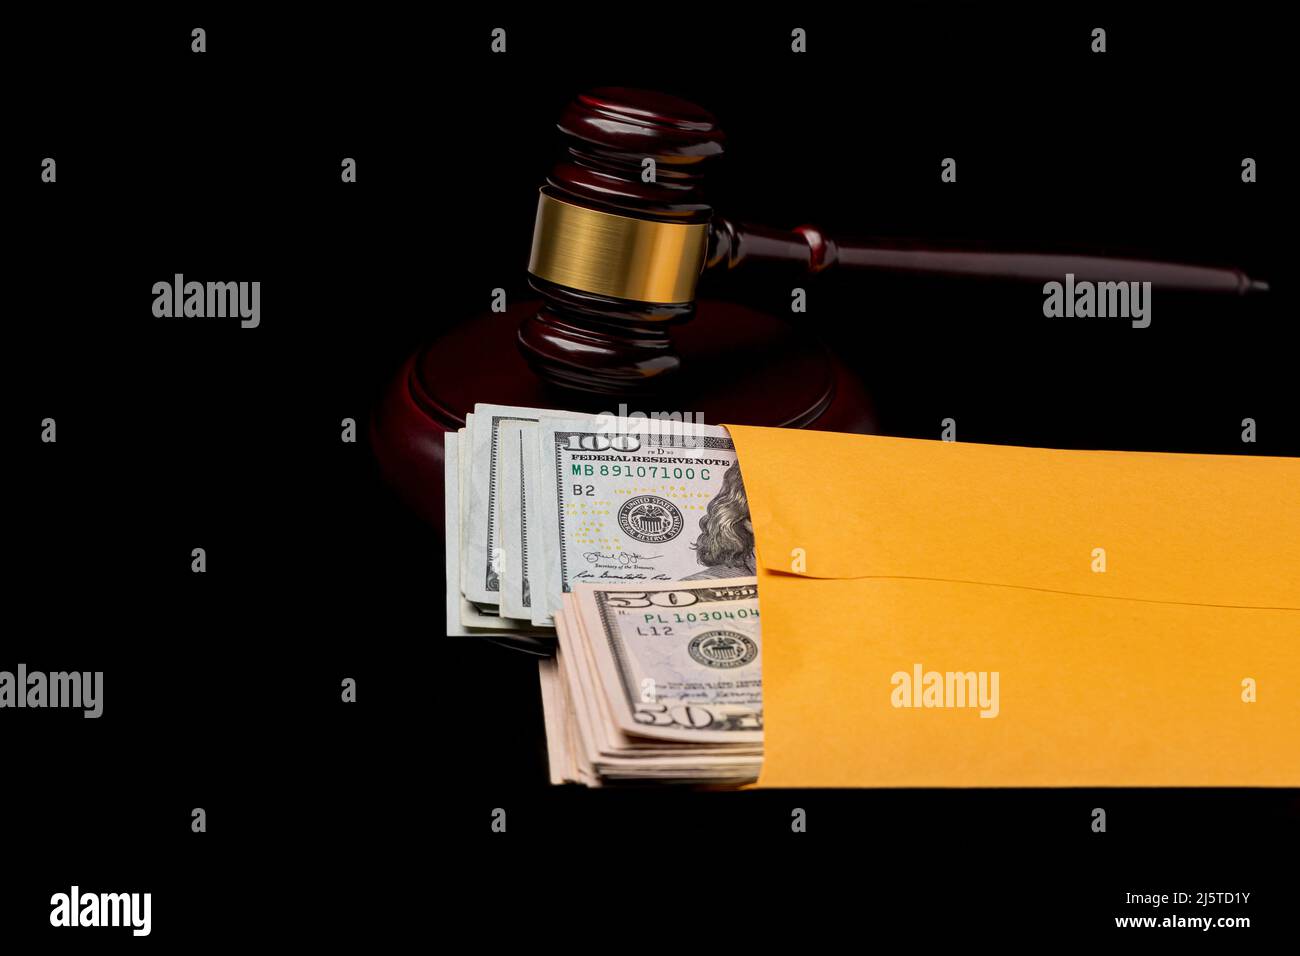 Courtroom gavel and cash money in envelope. Bribe, government corruption and corrupt legal system concept. Stock Photo